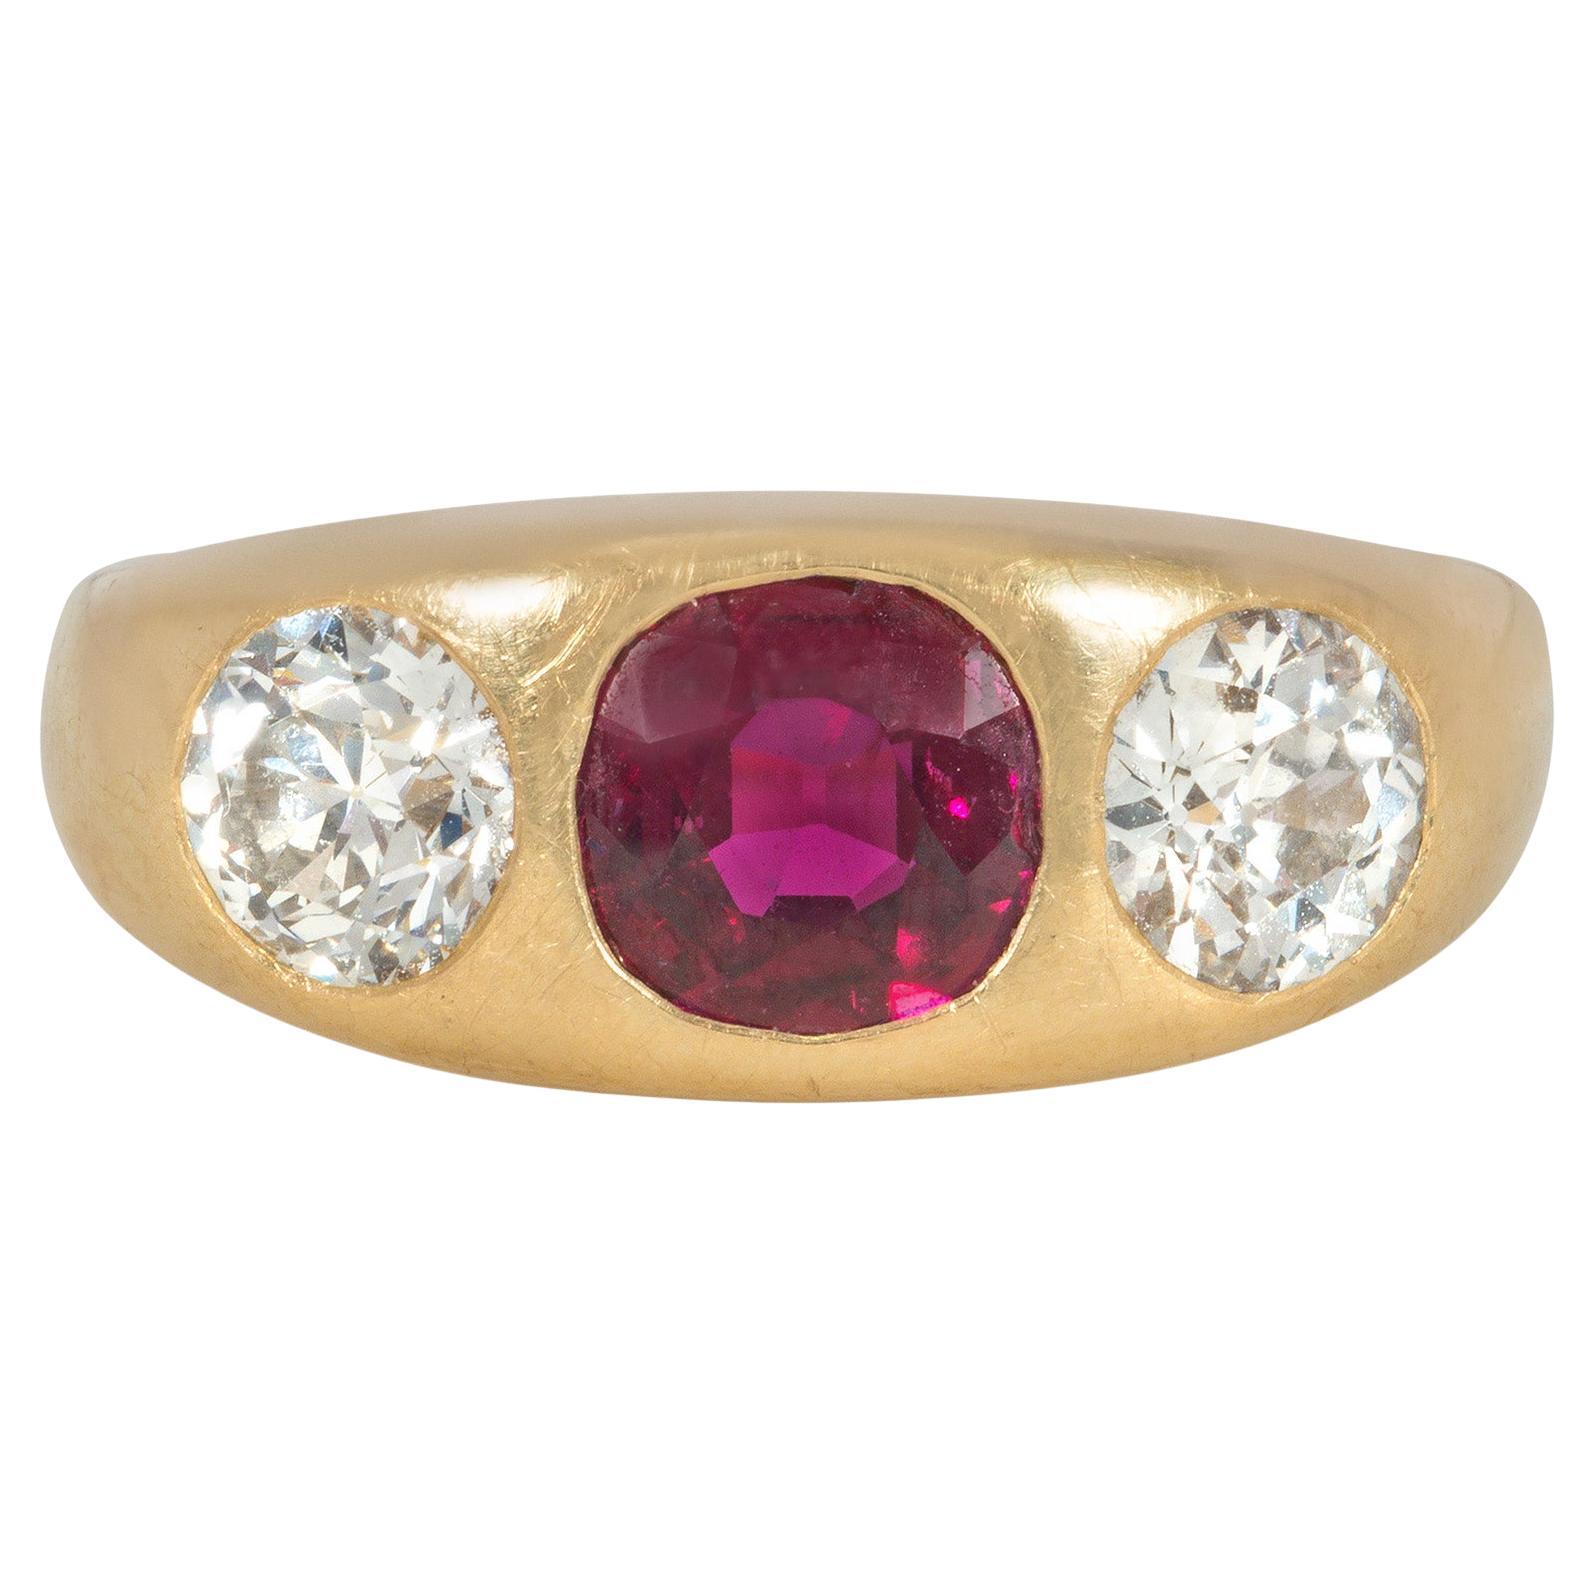 Antique Gold, Thai Ruby, and Diamond Three-Stone Ring with AGL Certificate